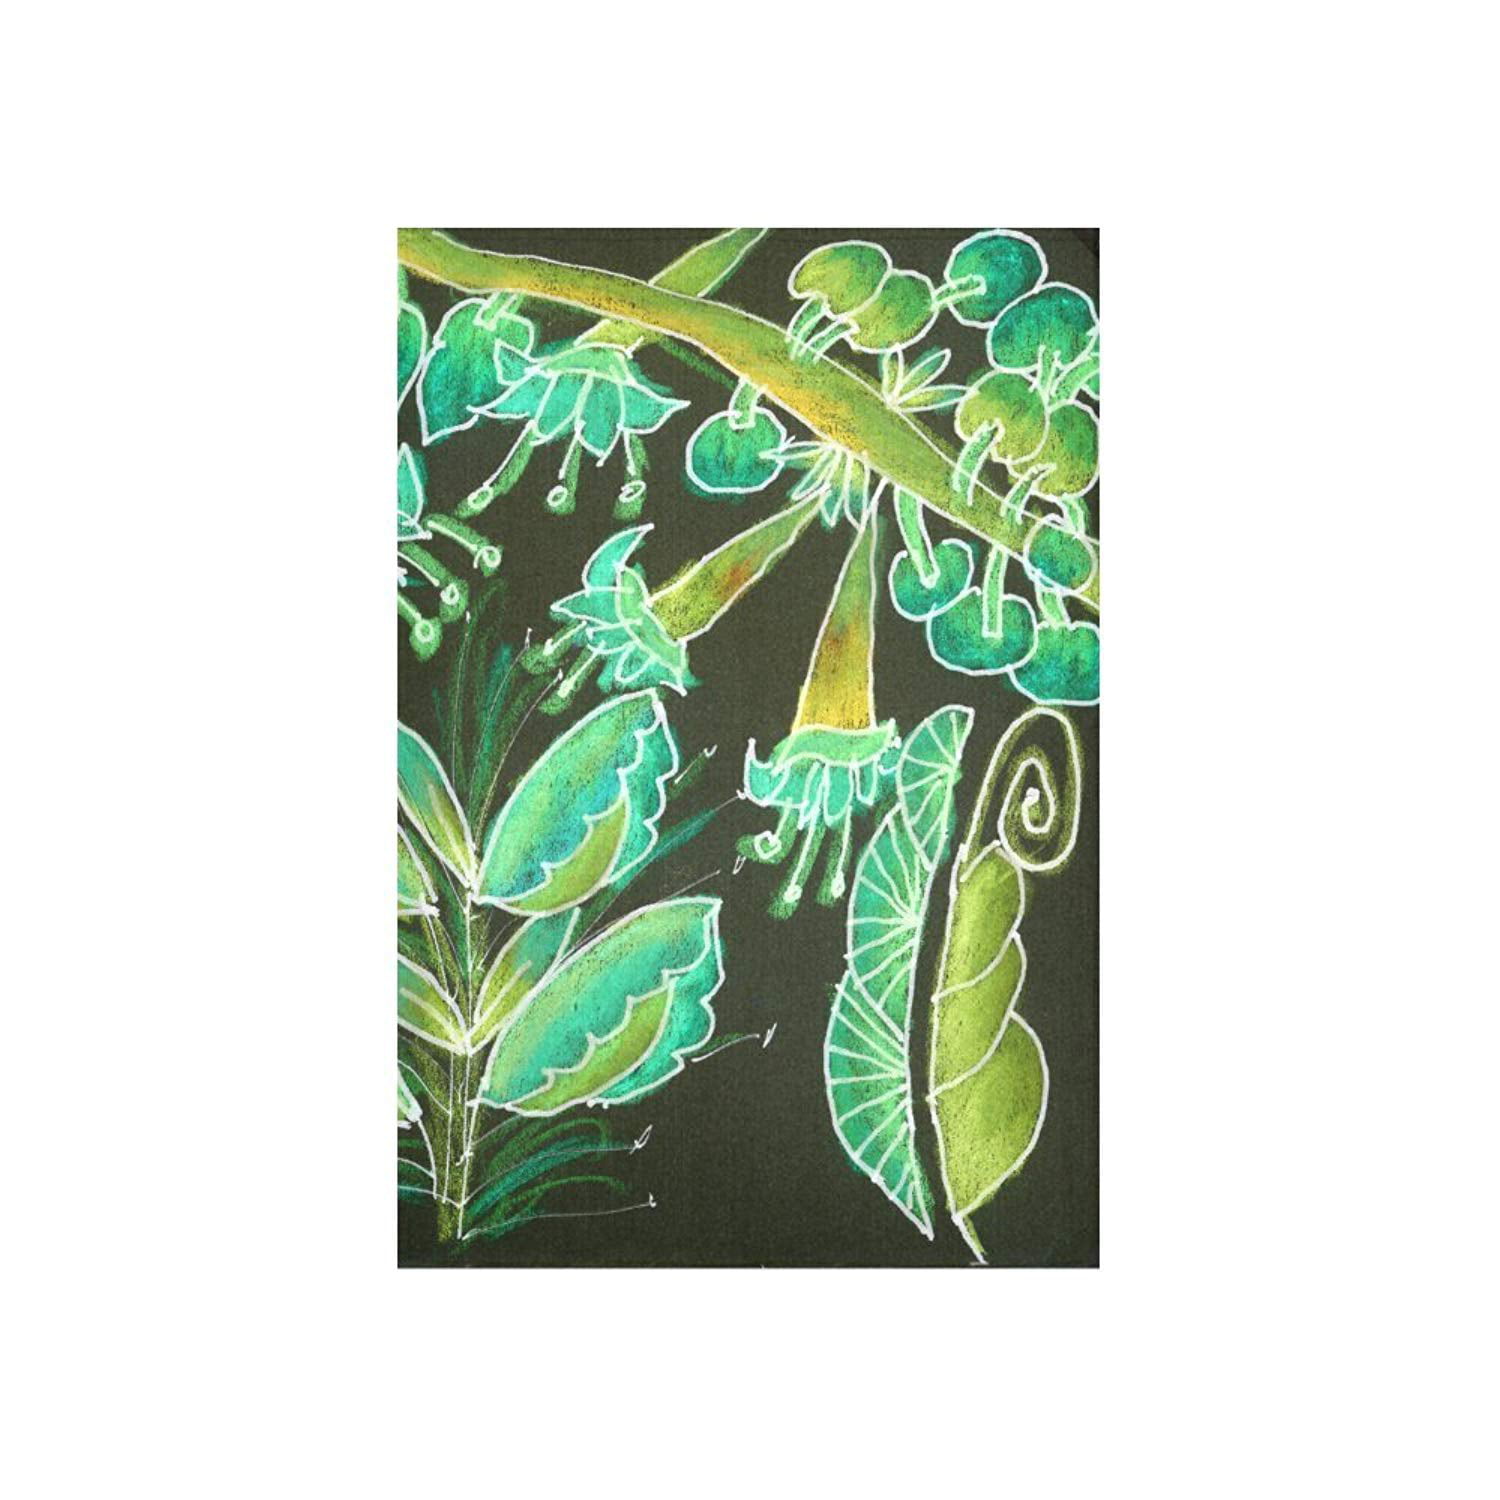 CADecor Irish Garden, Lime Green Flowers Dance in Joy Wall Tapestry Wall  Hanging Wall Art Home Decor 40x60 inches